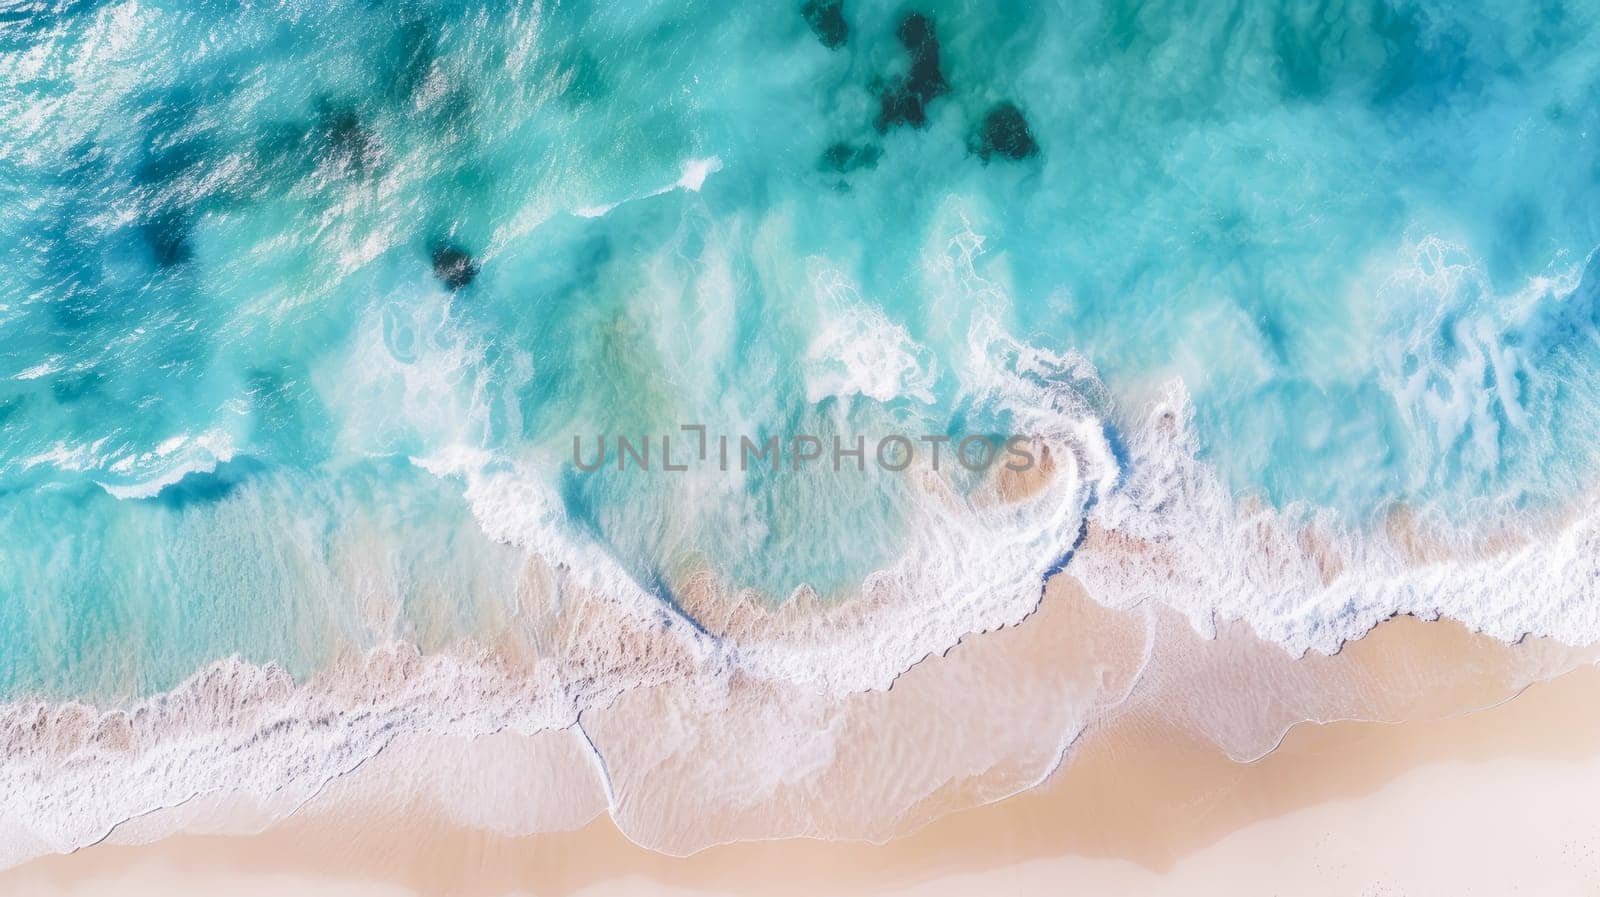 Beach with white sand and azure blue water on the island. Beautiful landscape, picture, phone screensaver, copy space, advertising, travel agency, tourism, solitude with nature, without people